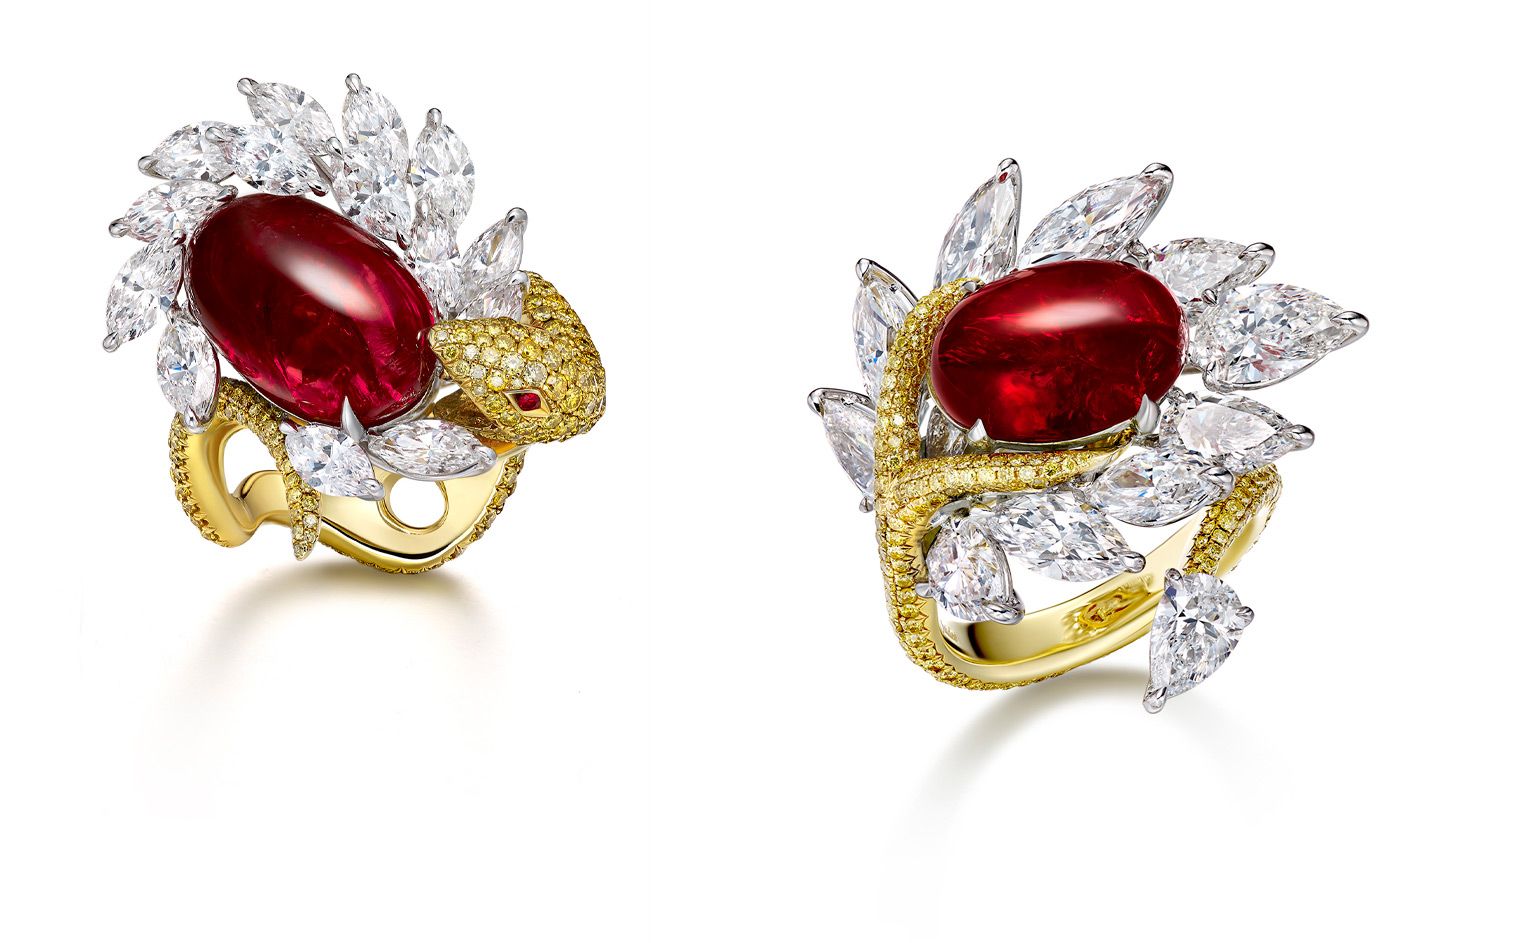 Faidee Burmese 'Pigeon's Blood' ruby and diamonds ring with a snake-inspired design